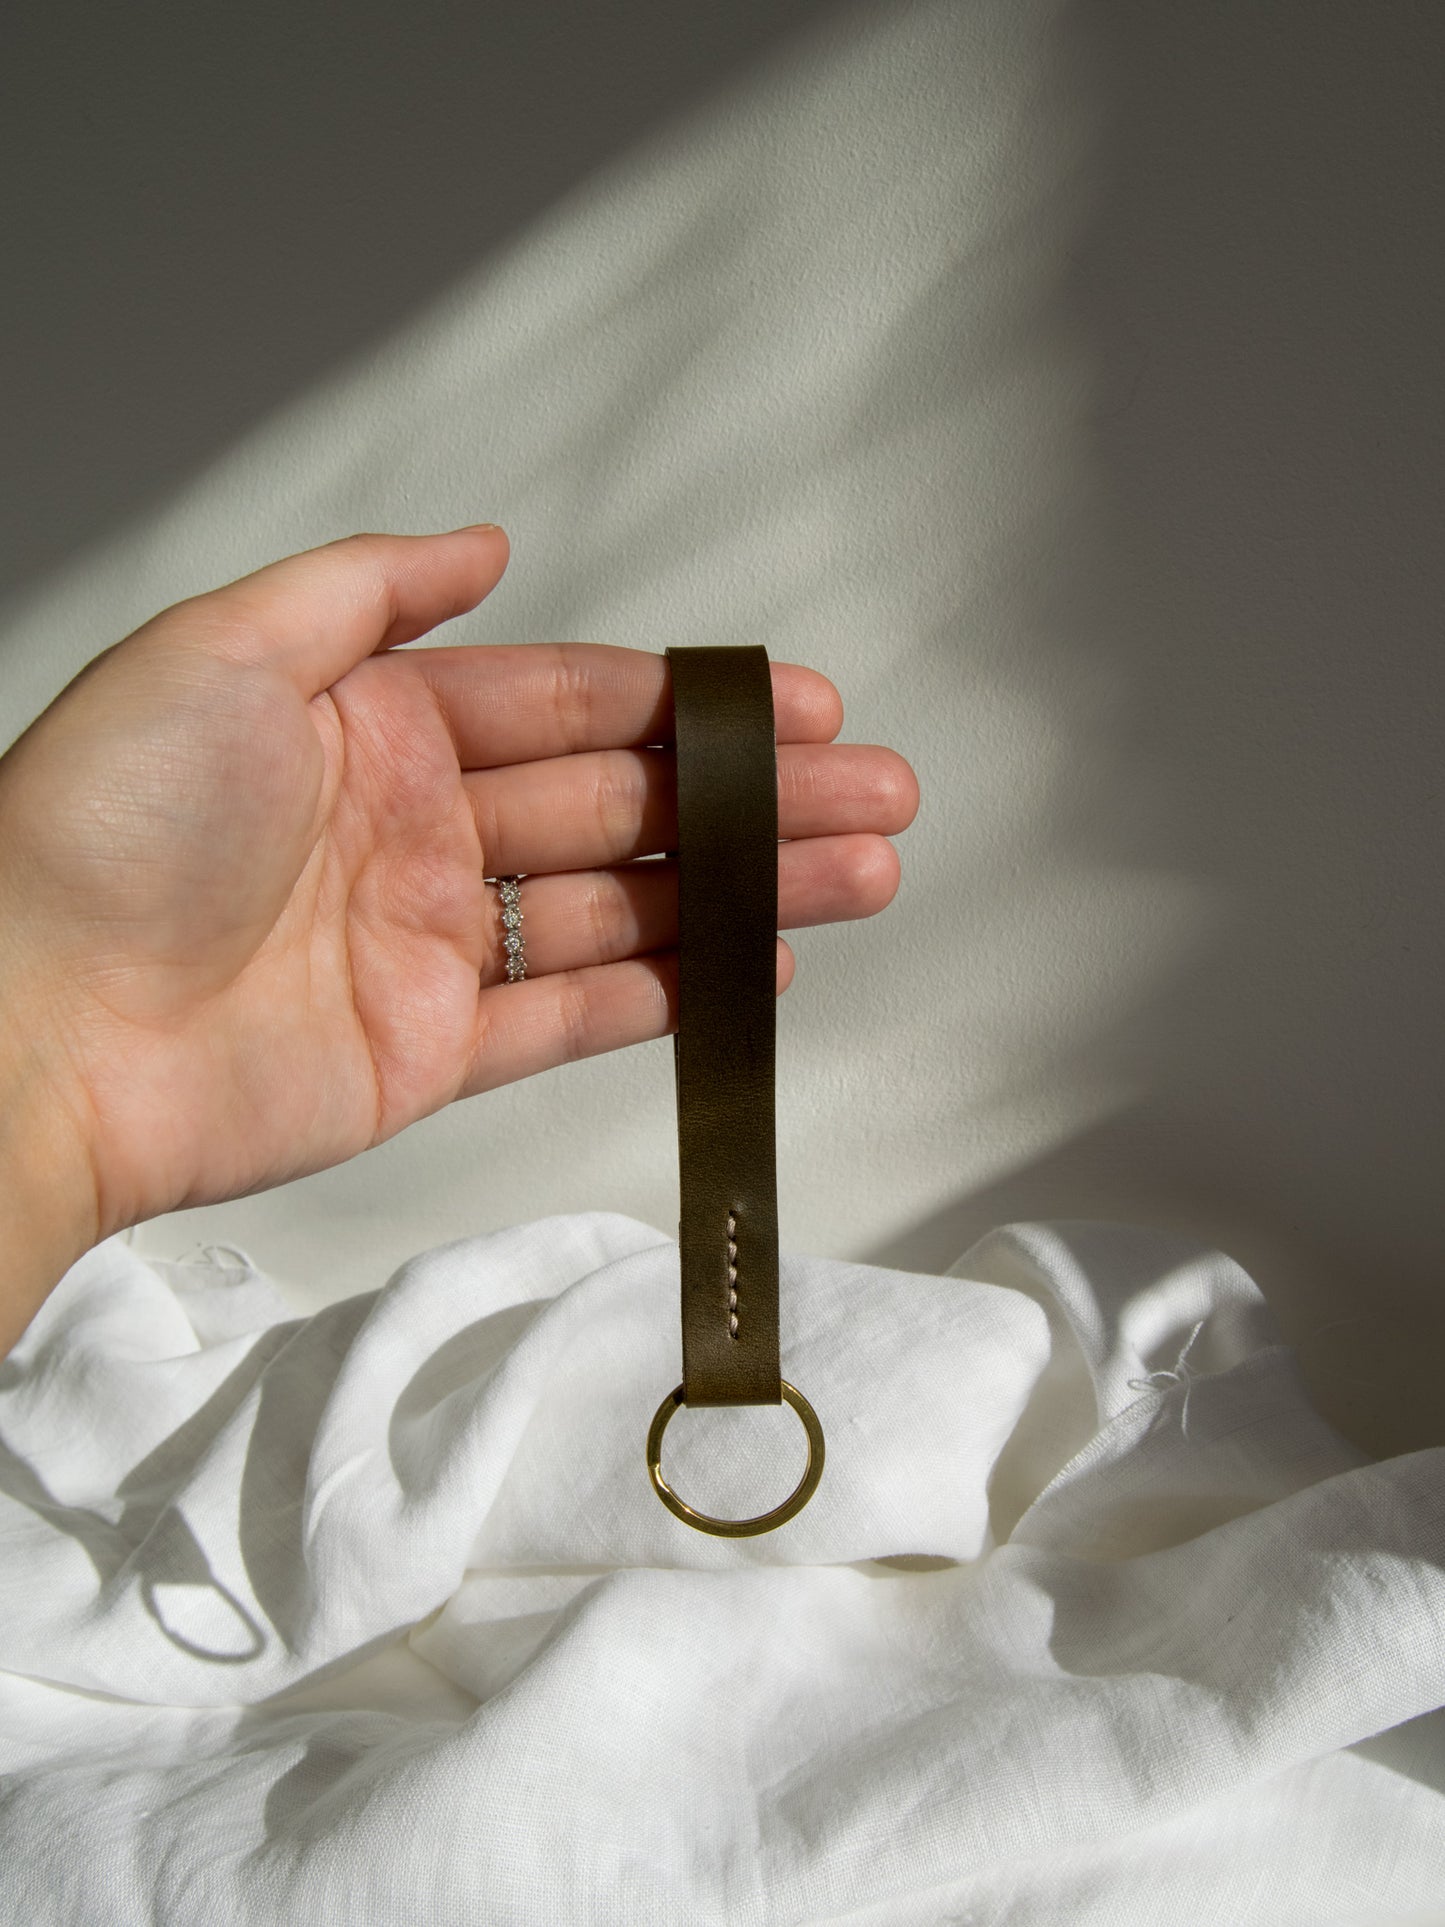 Leather Key Fob in Olive Green